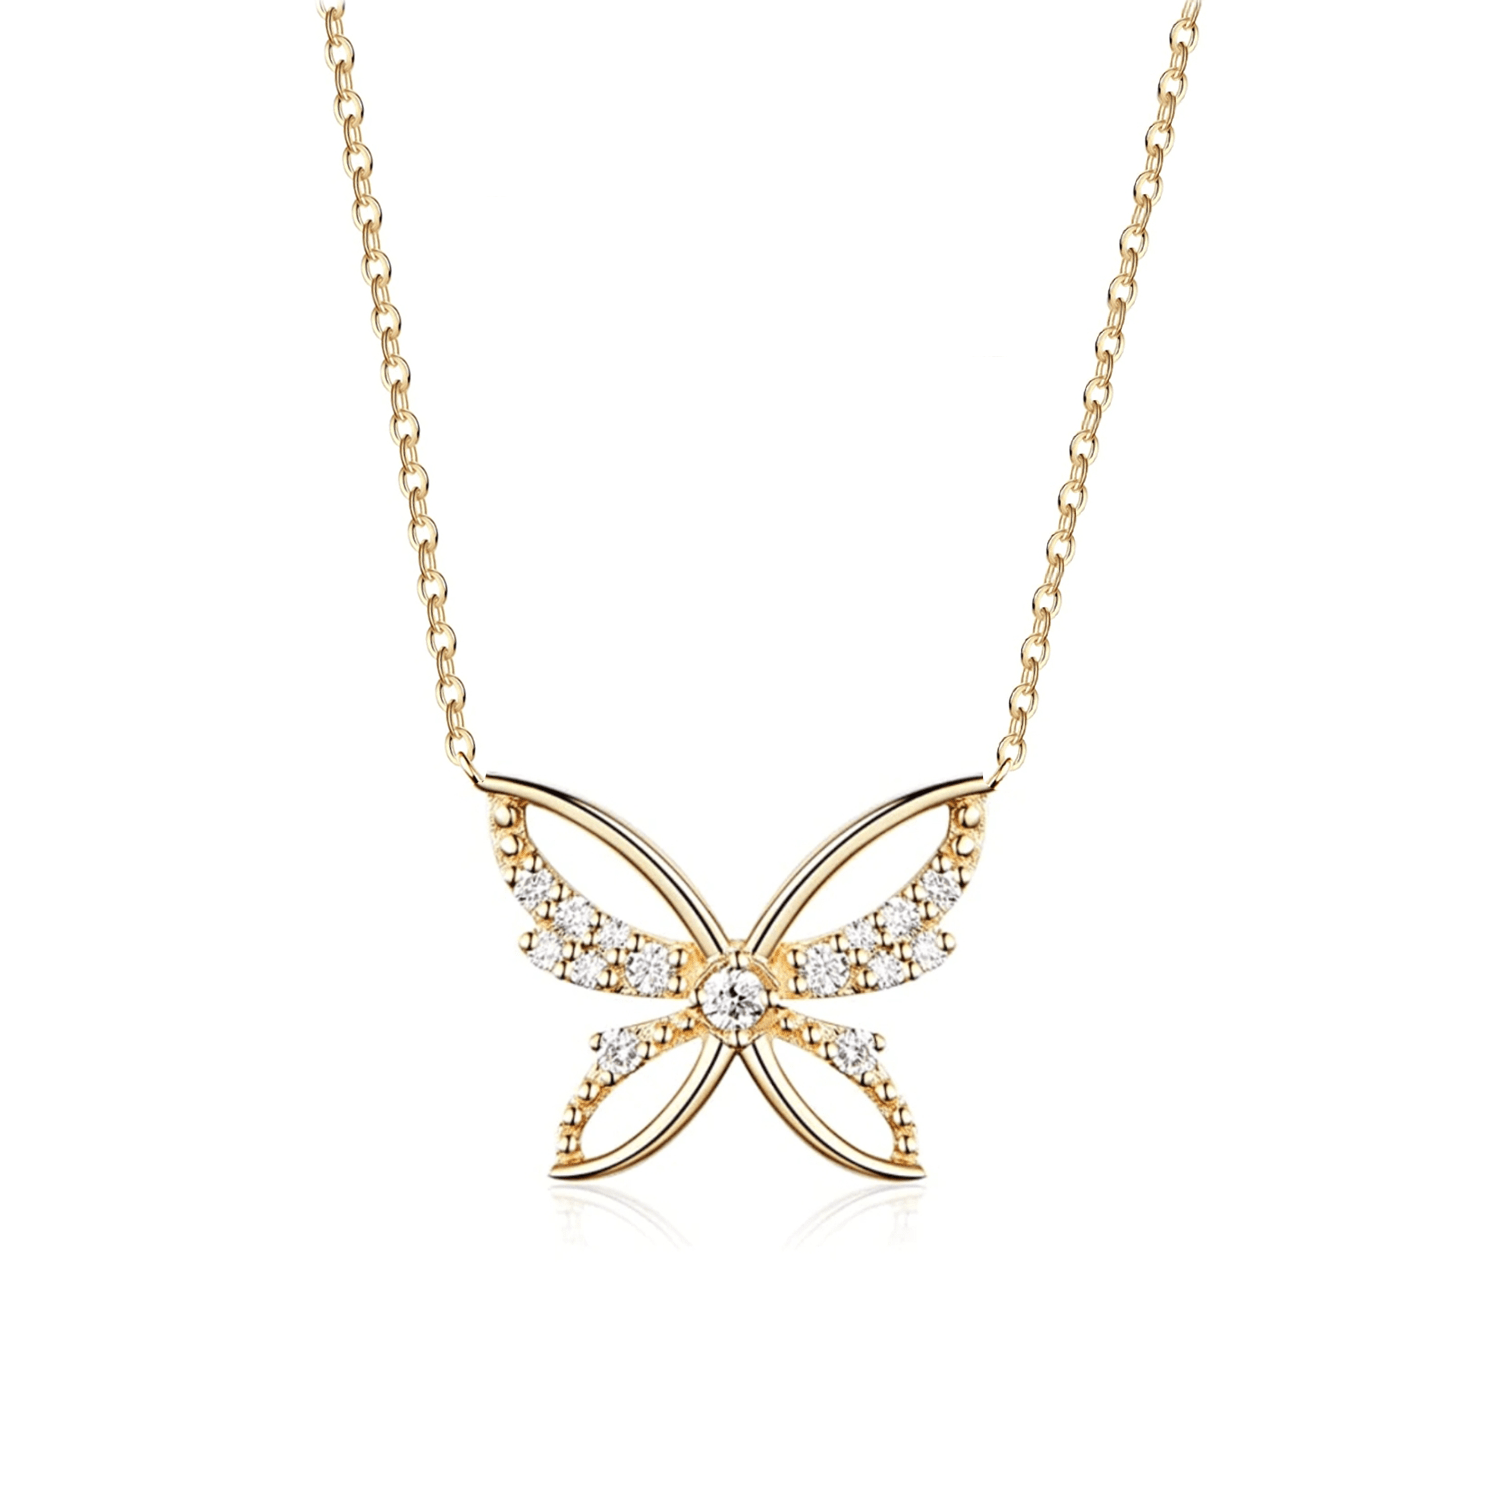 FANCIME "Yellow Cosmo" Diamond Butterfly 14K Yellow Gold Necklace Main